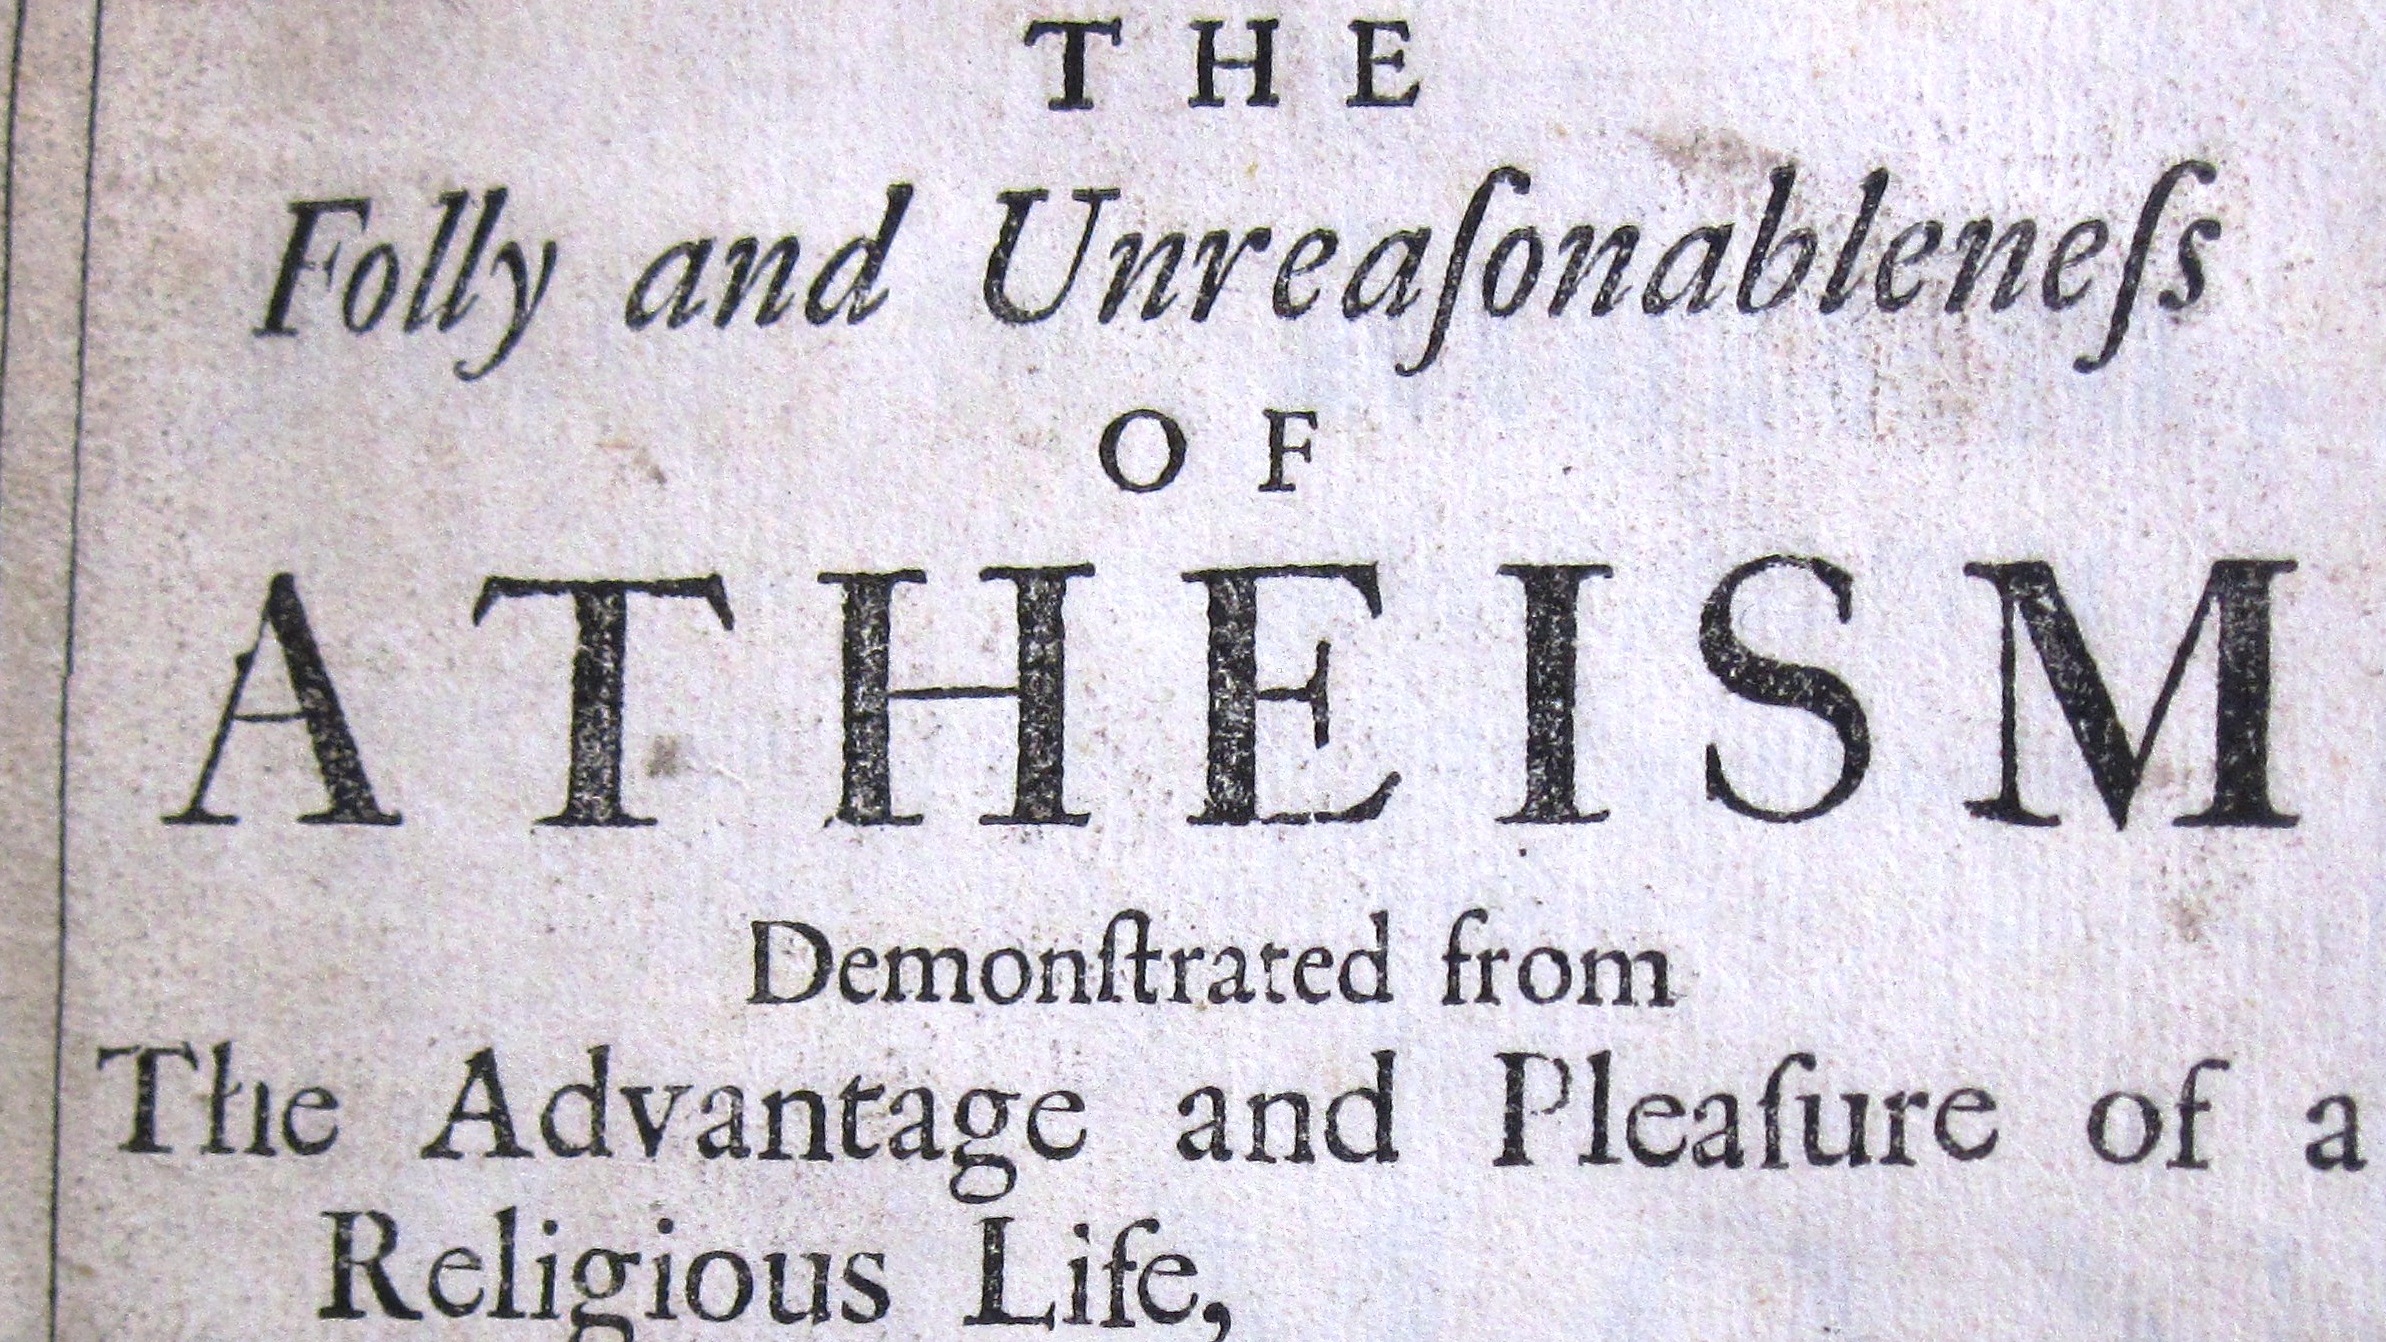 Boyle-Folly-of-Atheism-1692-title-page-Cropped.jpg